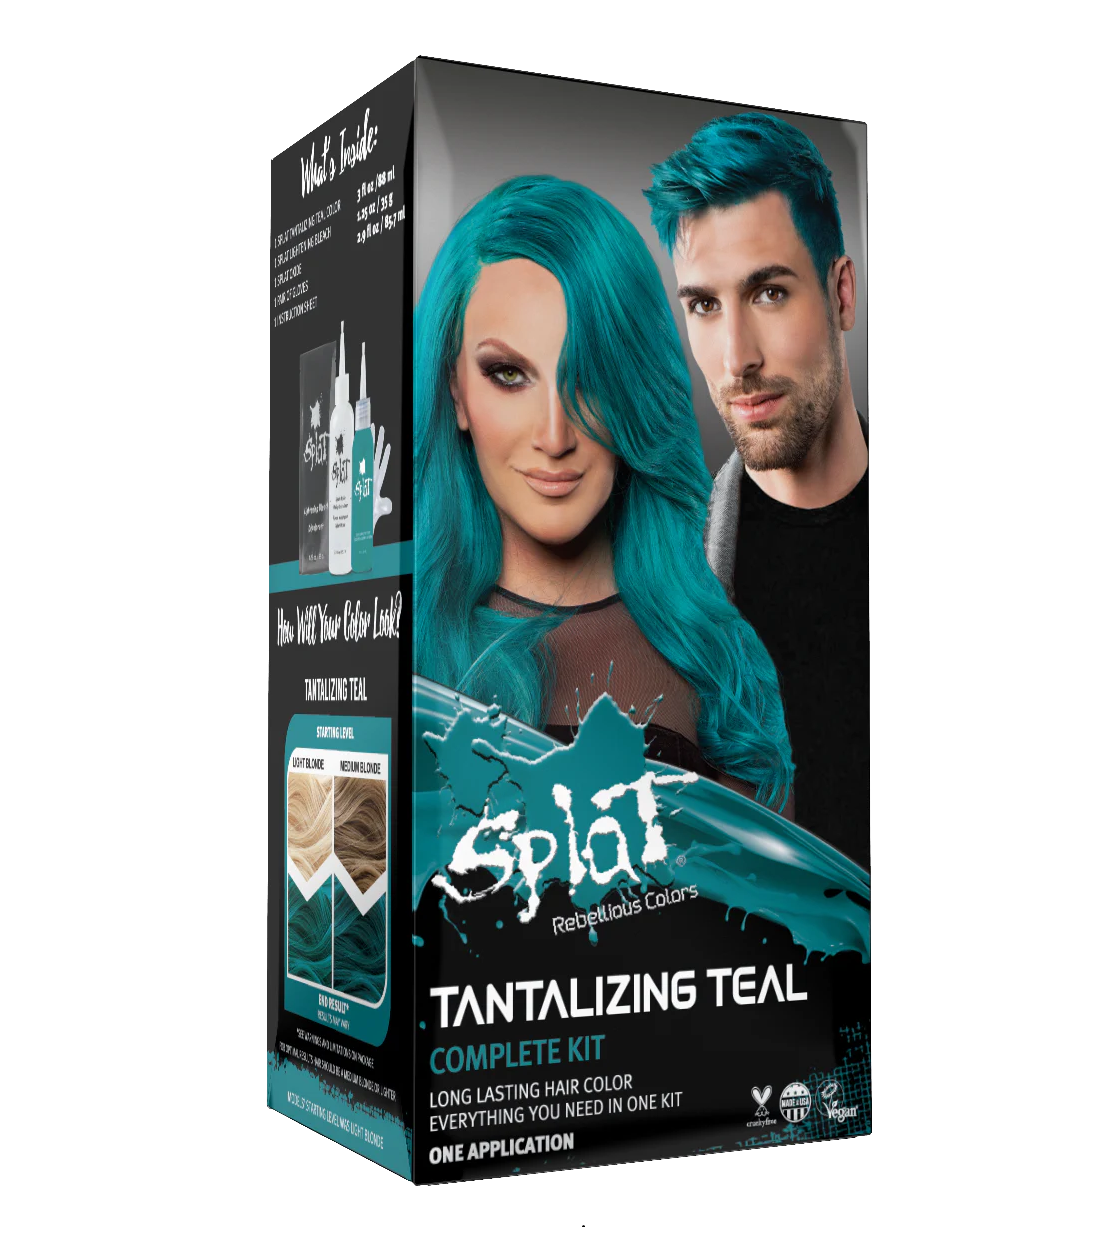 Tantalizing Teal: Original Teal Semi-Permanent Hair Dye Complete Kit with Bleach